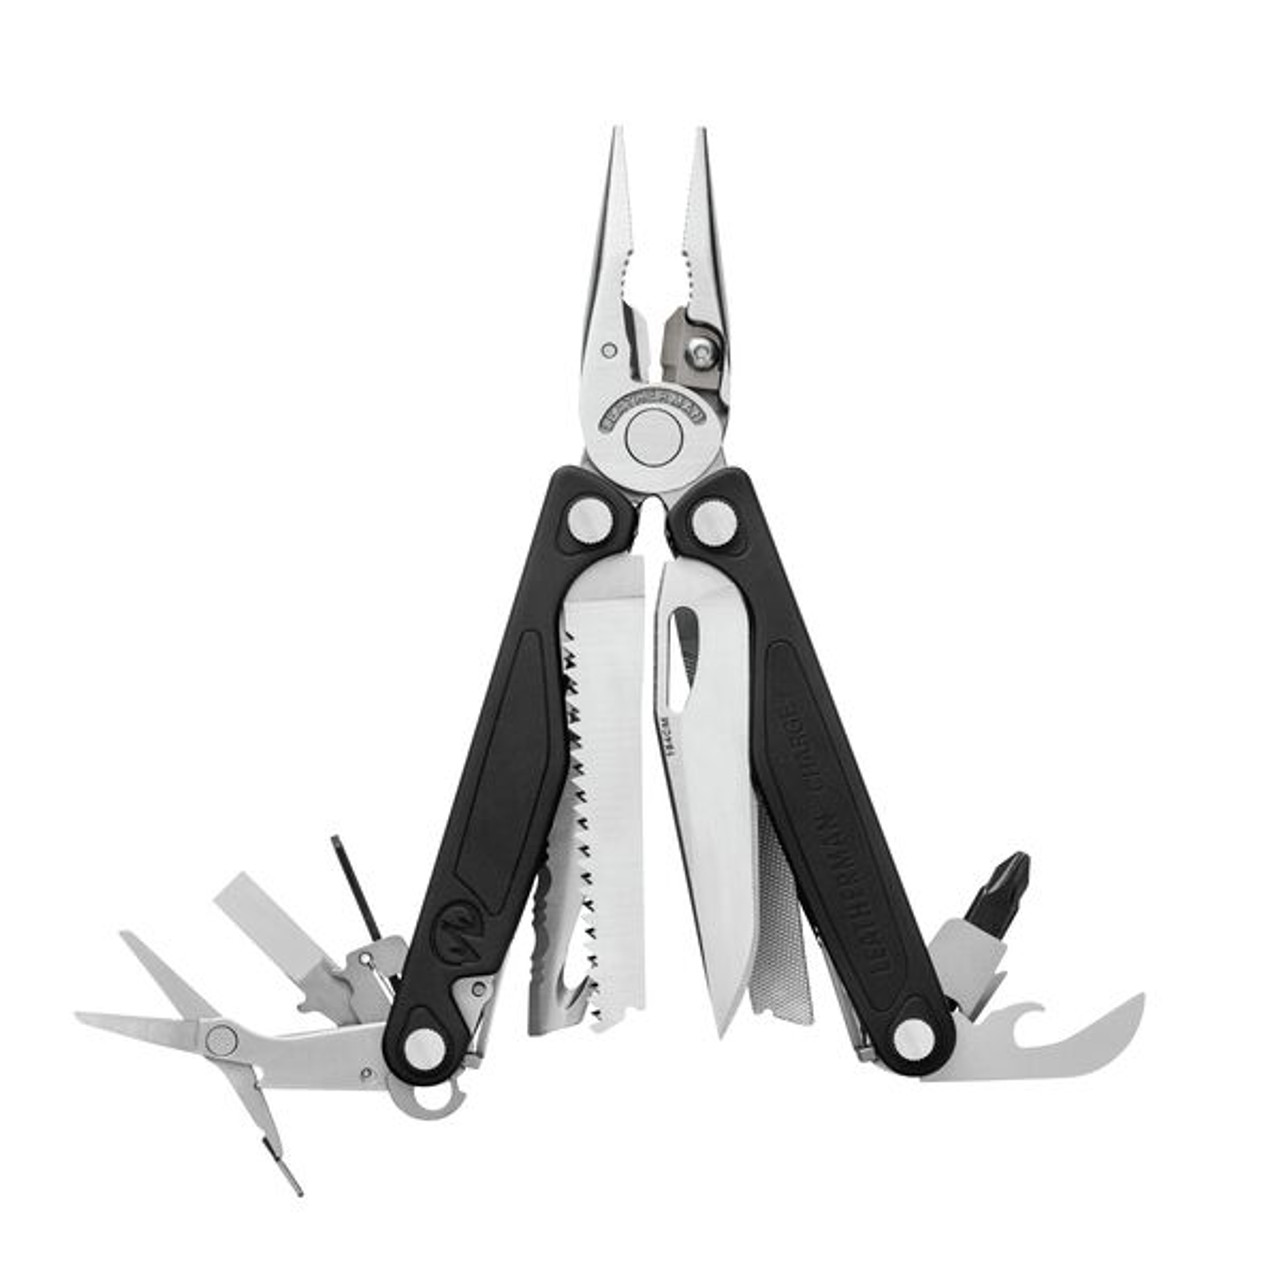 Leatherman　Knives　Steel　Multitool　of　Charge+　House　832516|　Stainless　Canada